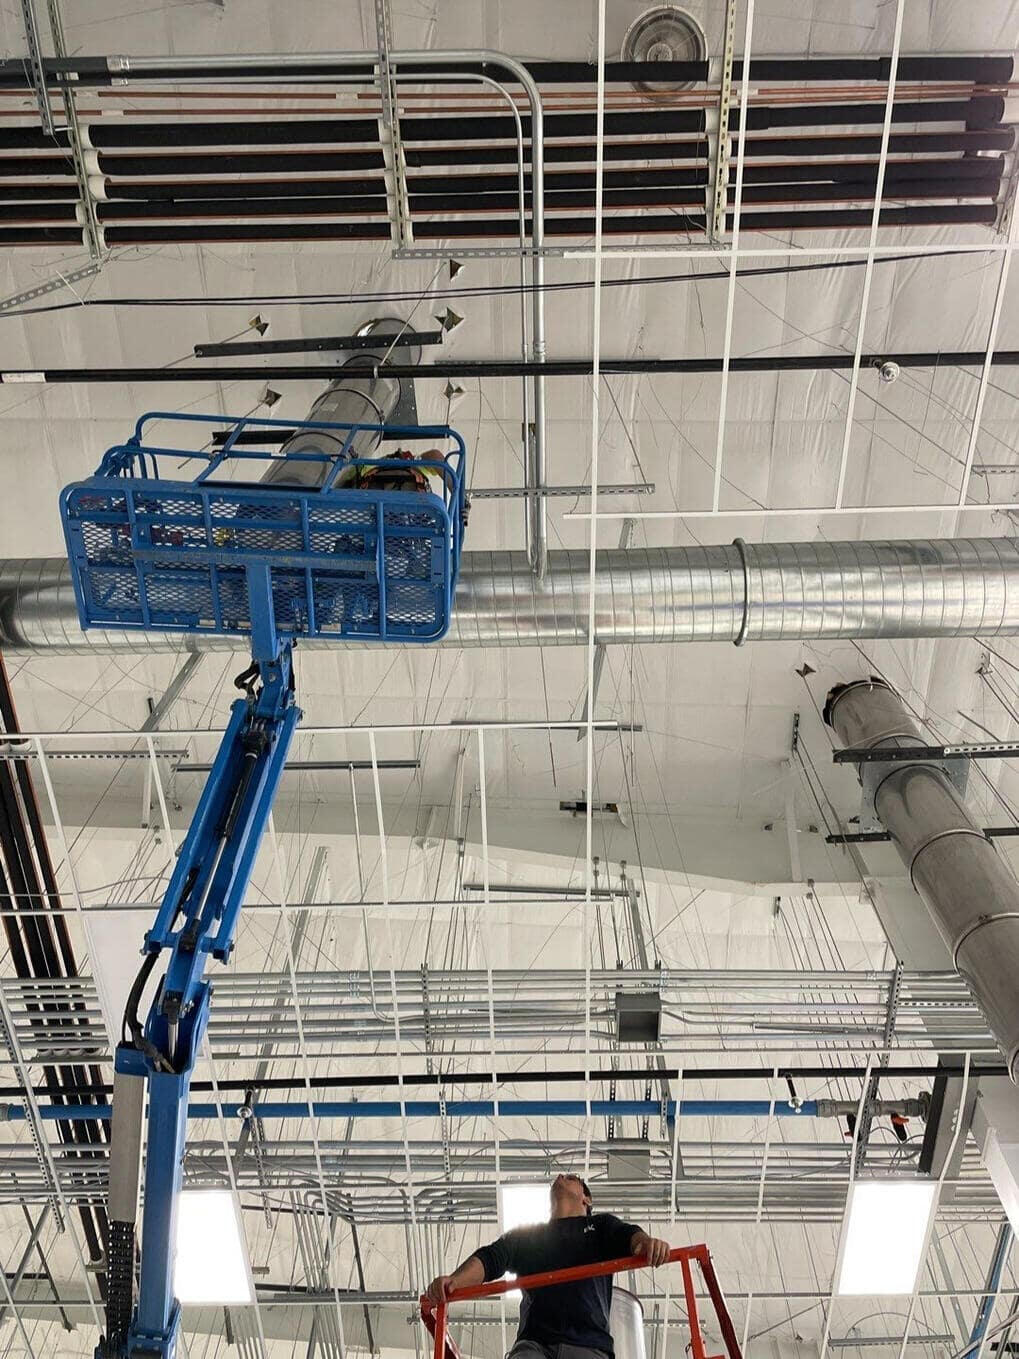 Roofers utilizing an aerial lift inside a commercial building in Albuquerque, New Mexico, to cut penetrations in the ceiling for vents that will connect to the roof.